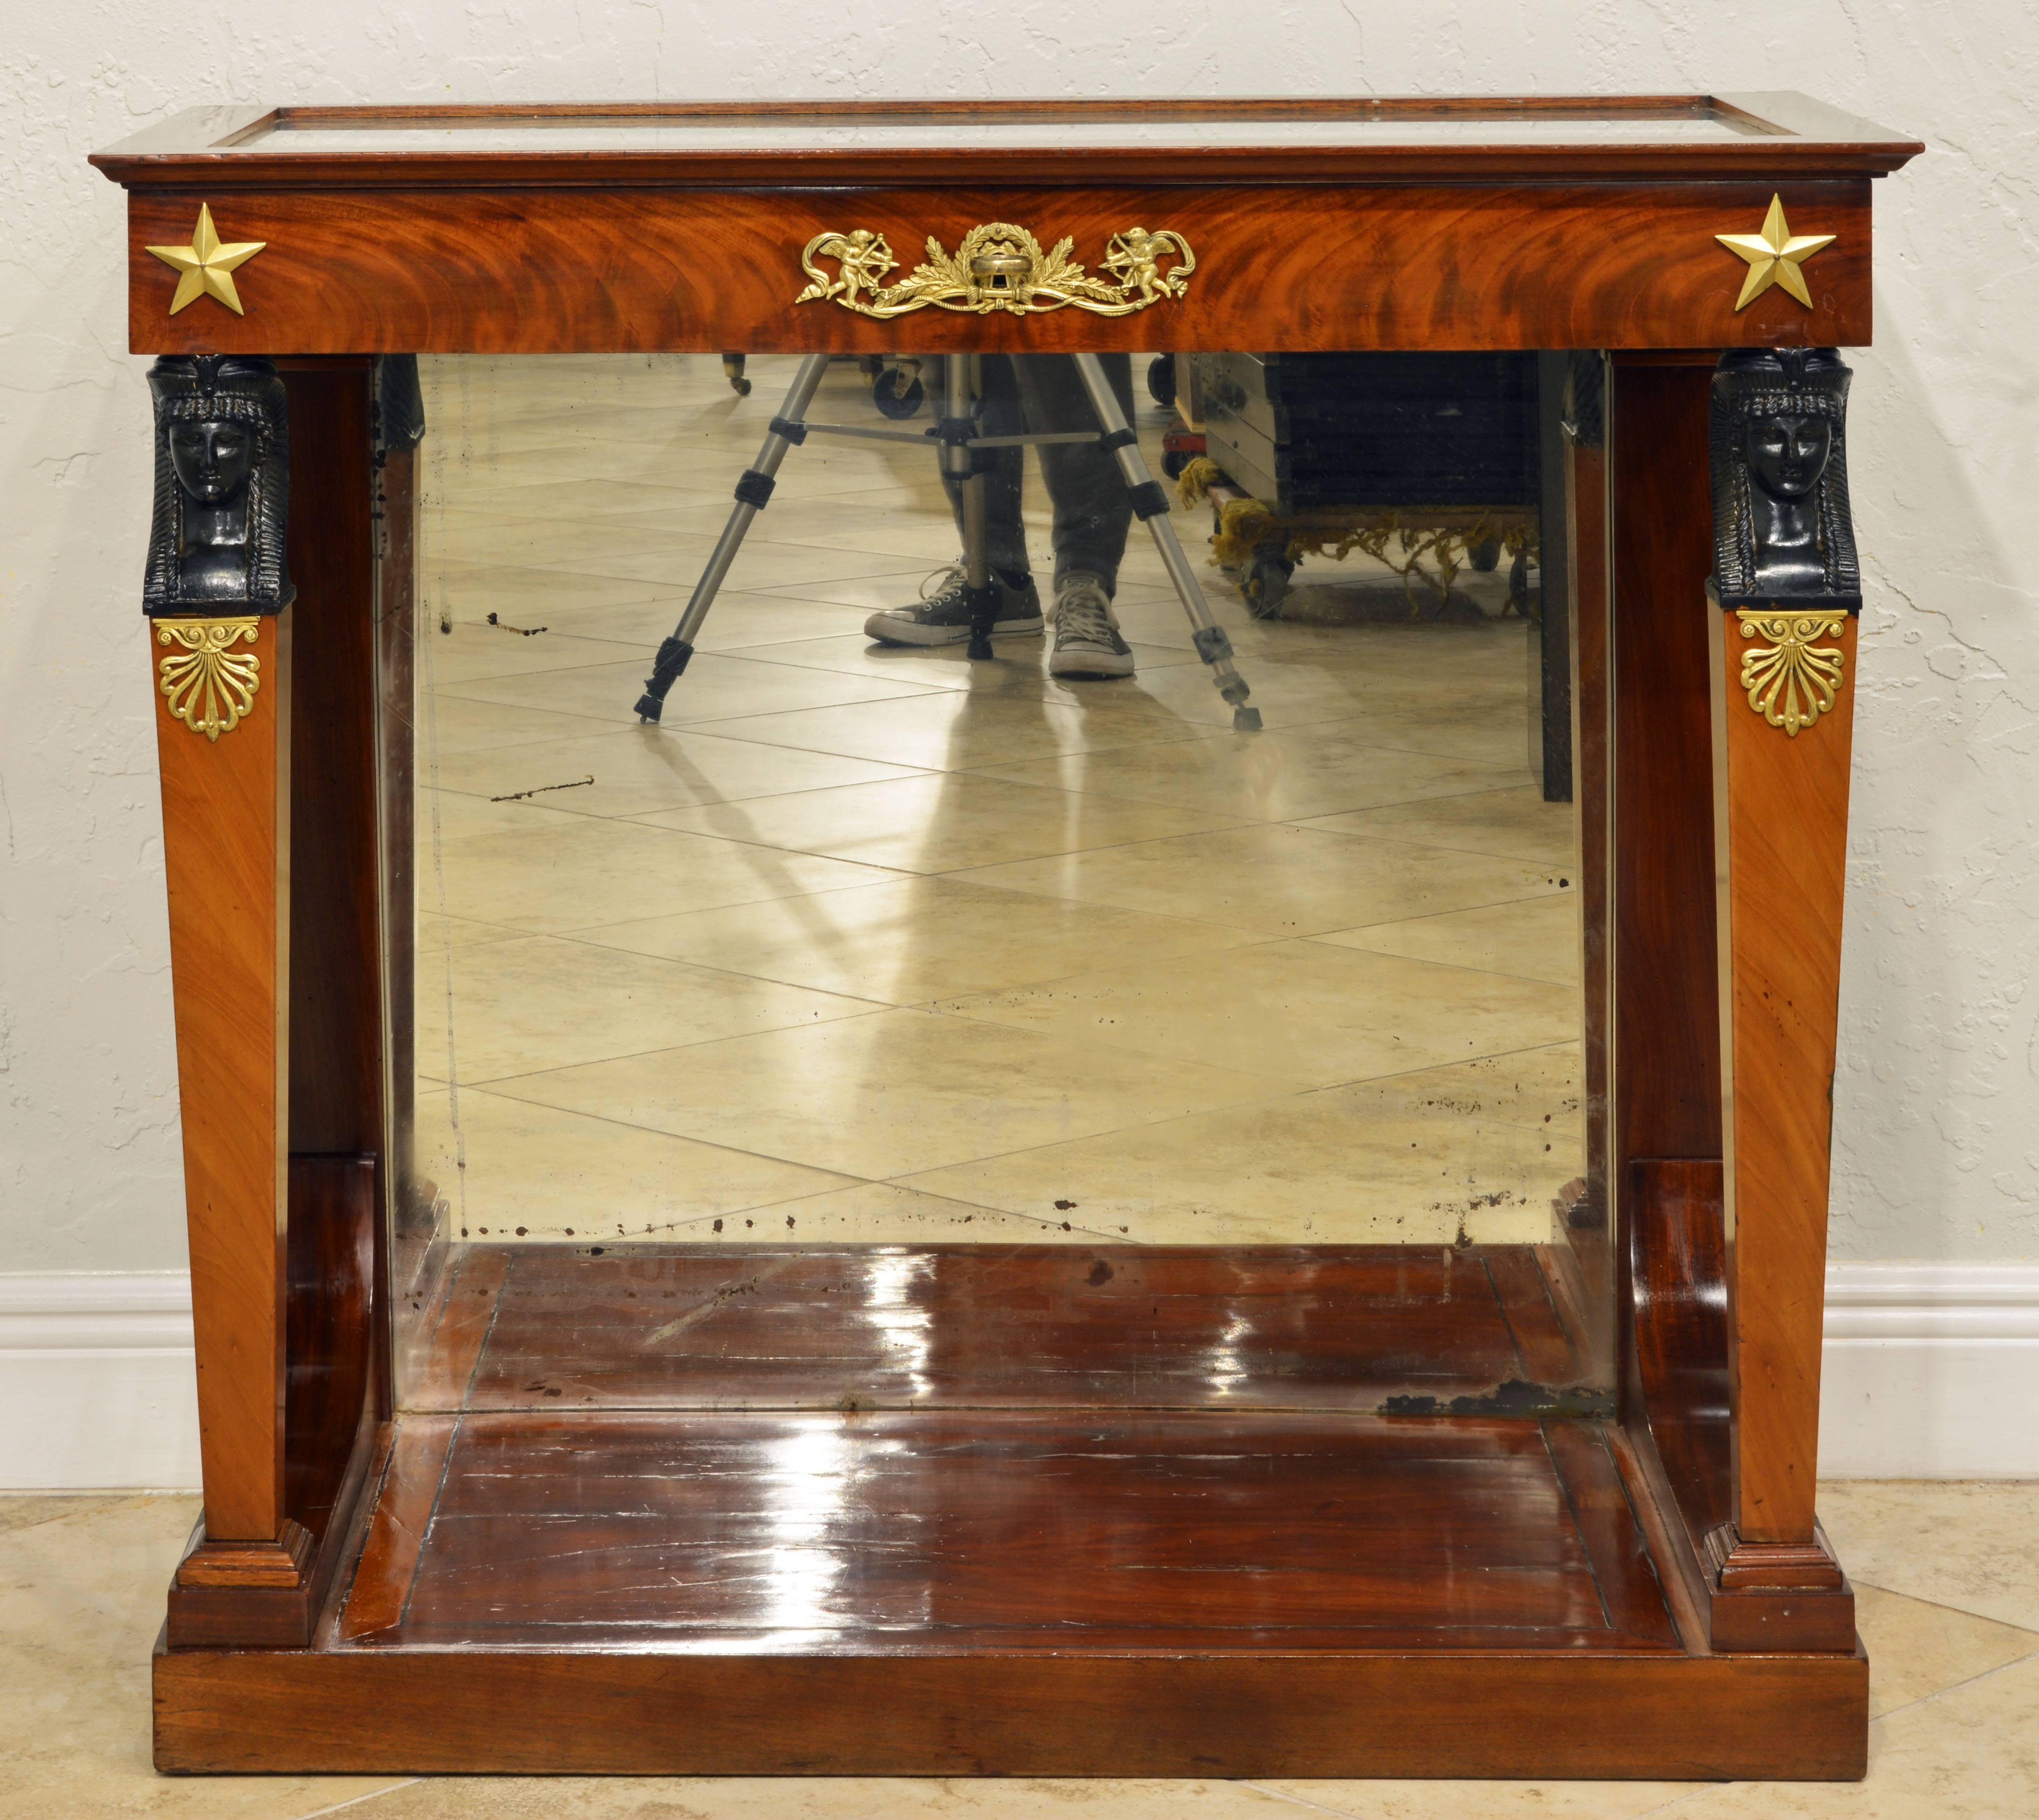 This rare and elegant vitrine console table features a wood framed glass top that opens up to a silk lined vitrine display compartment above a ormolu-mounted frieze resting on two square tapering front legs surmounted by carved ebonized Egyptian